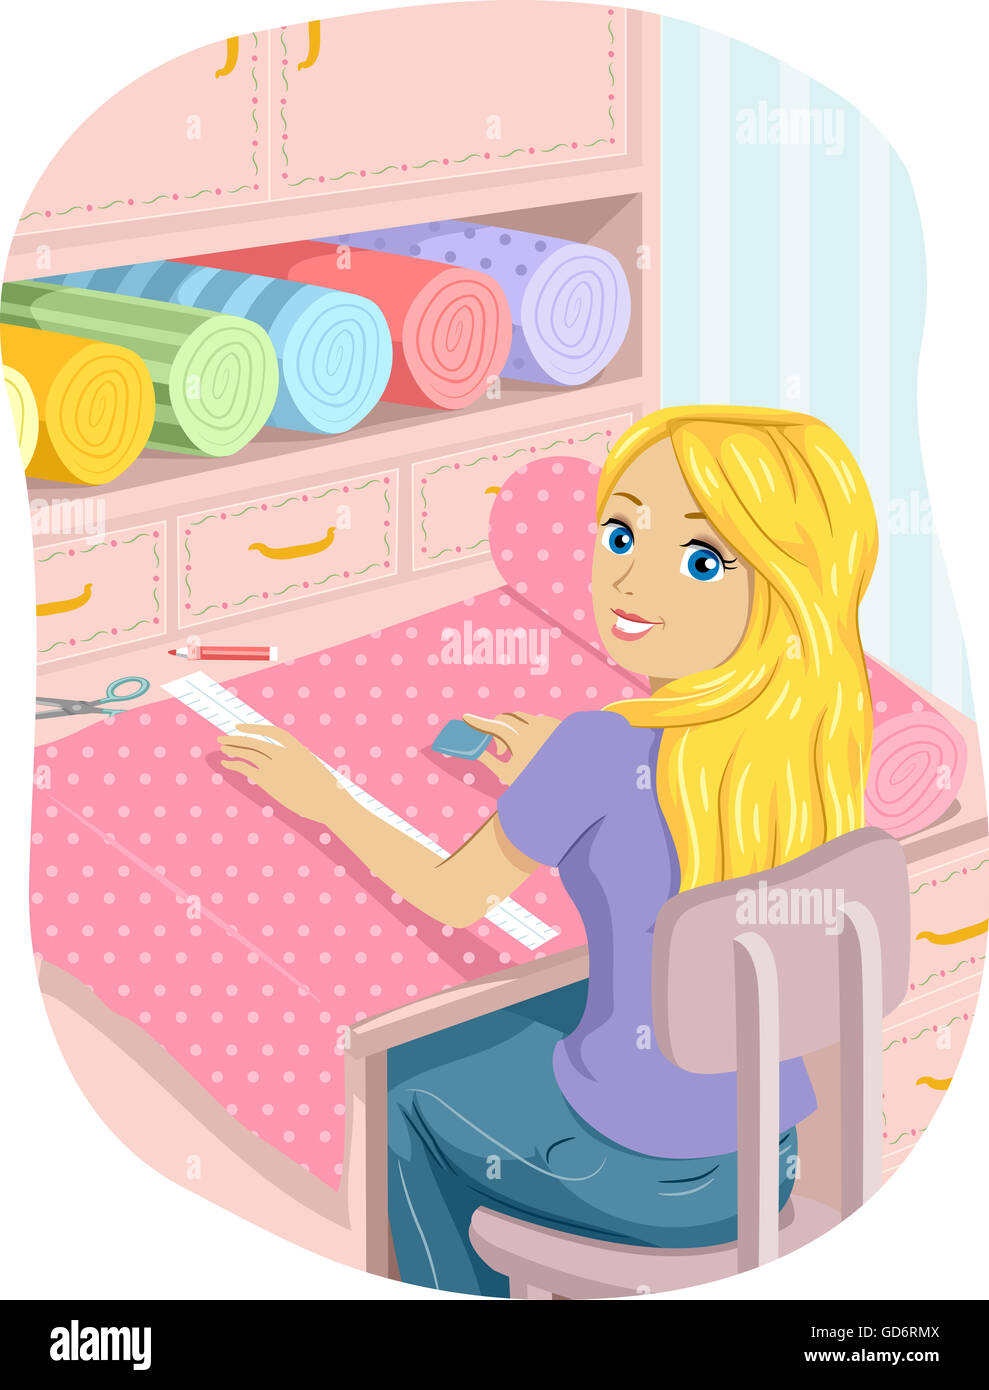 Illustration of a Teenage Girl Cutting Strips of Cloth Stock Photo